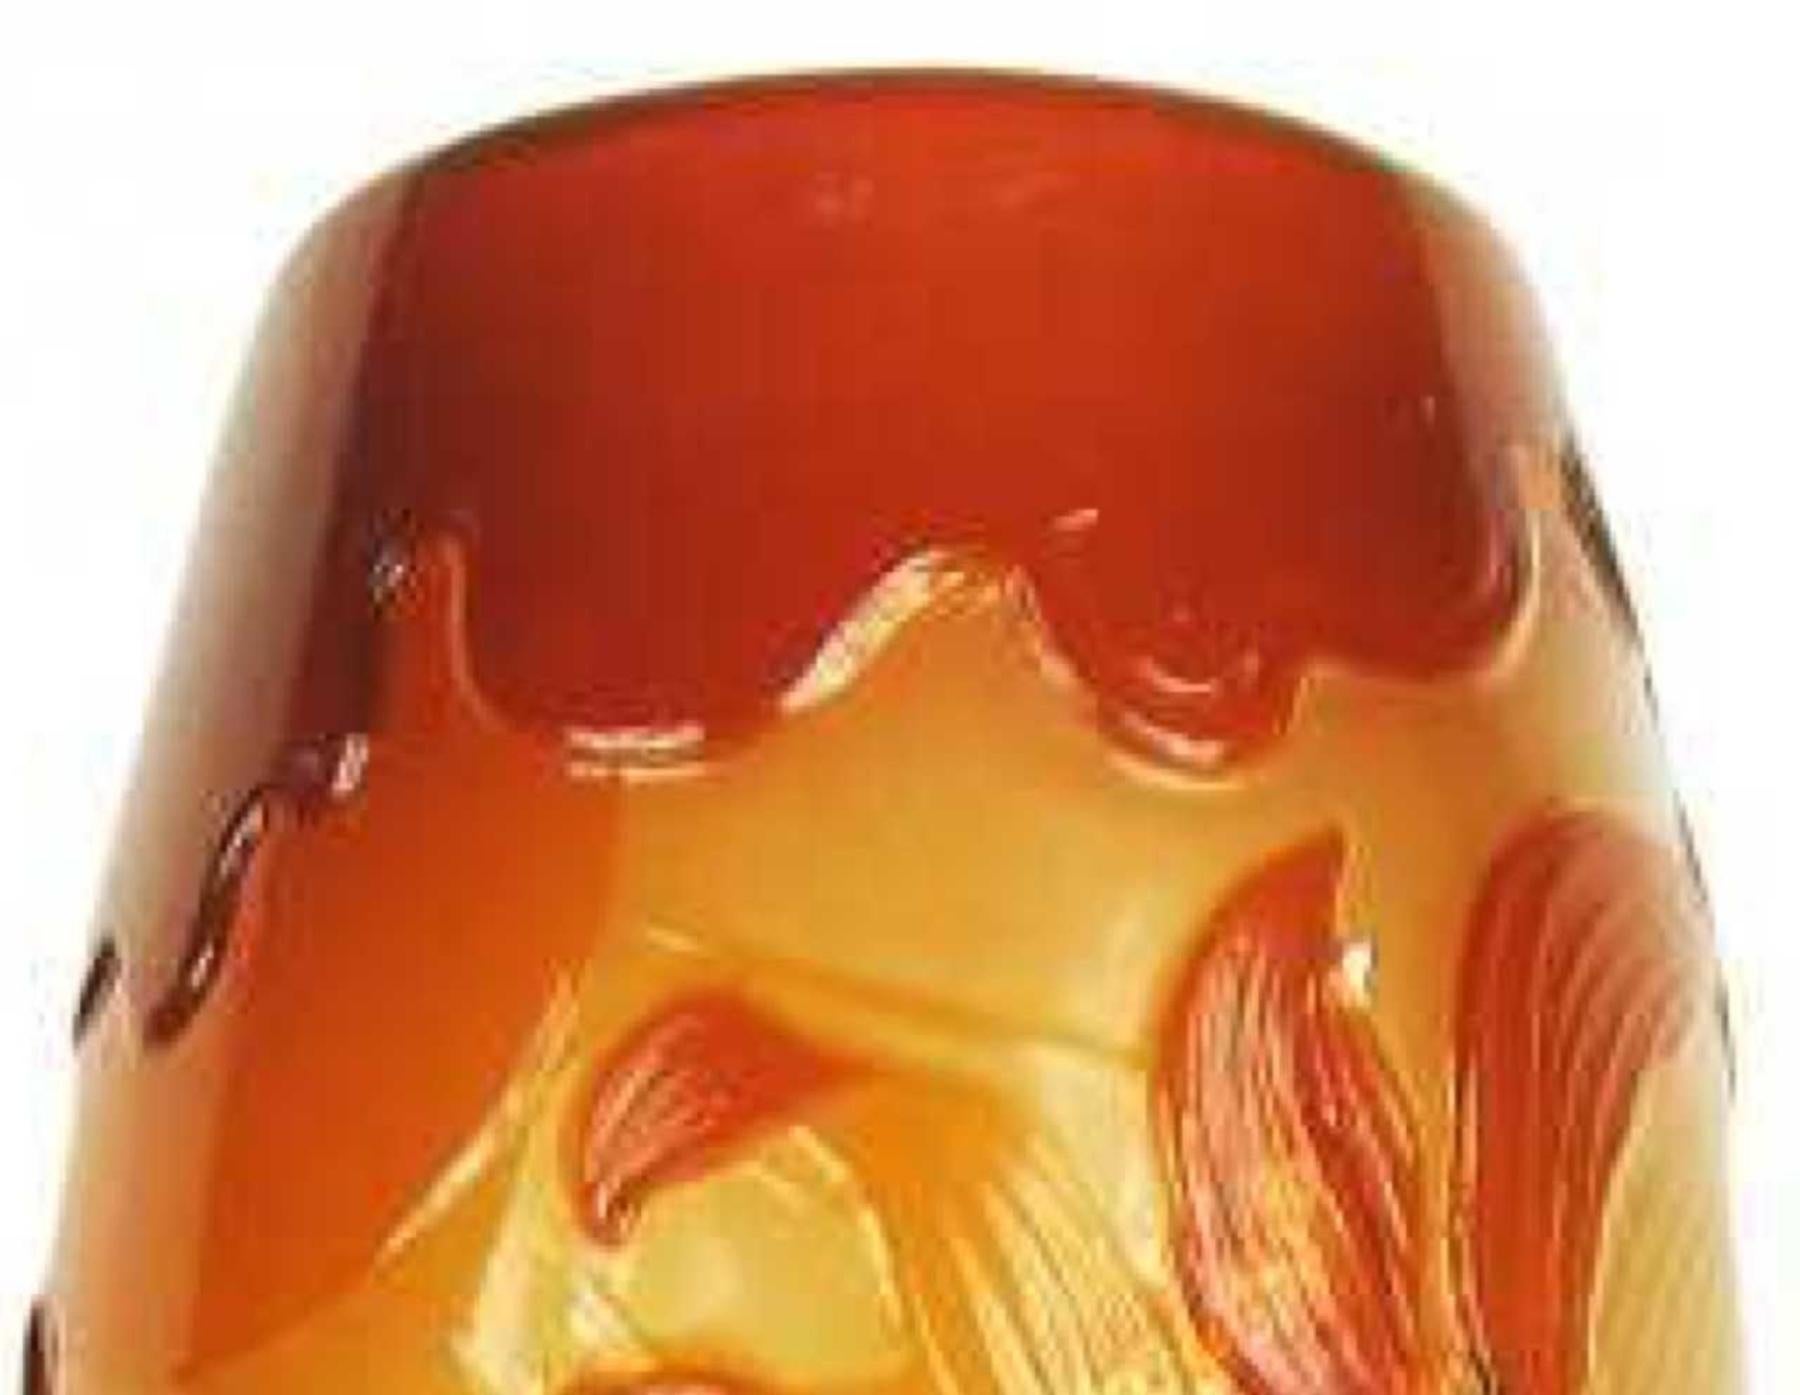 'Dahlia' Fire-Polished Cameo Glass Vase, Signed by Emile Gallé, circa 1900 In Excellent Condition For Sale In West Palm Beach, FL